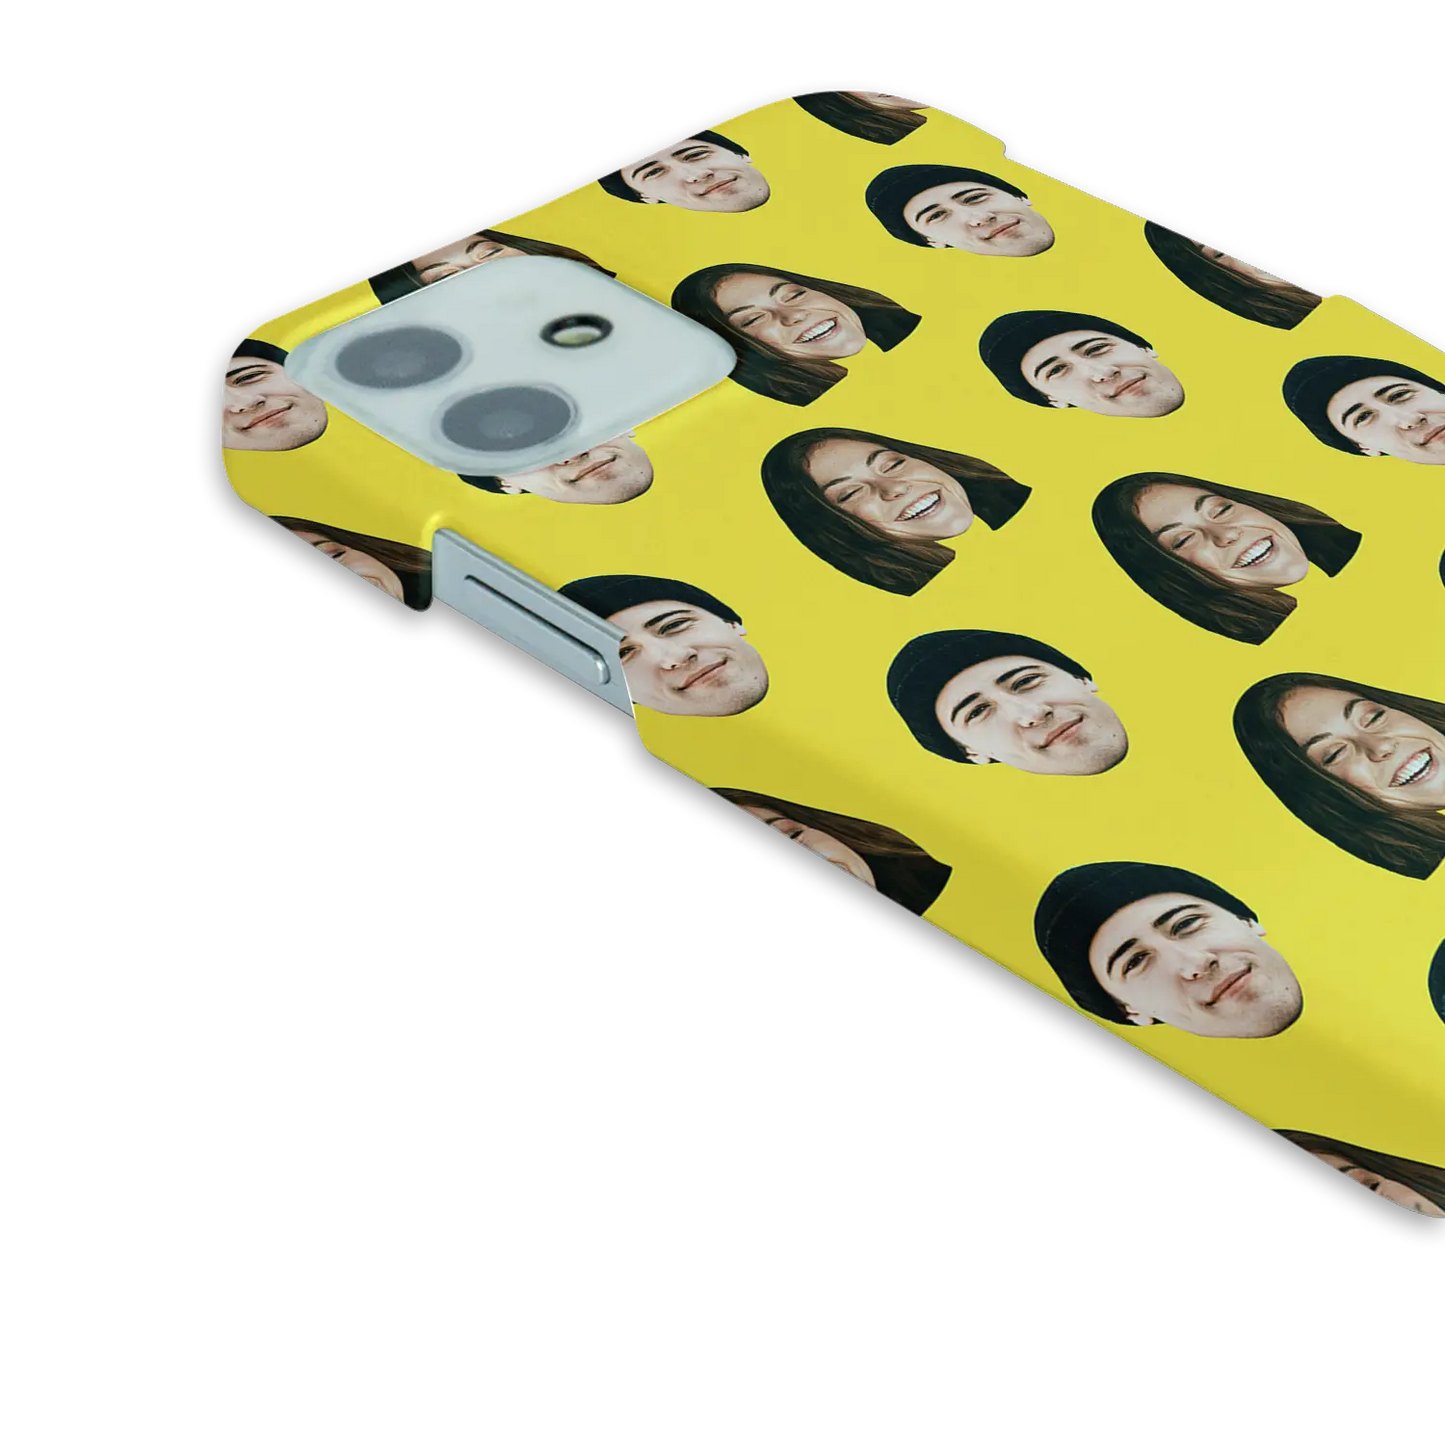 2 Face - Personalised iPhone Case